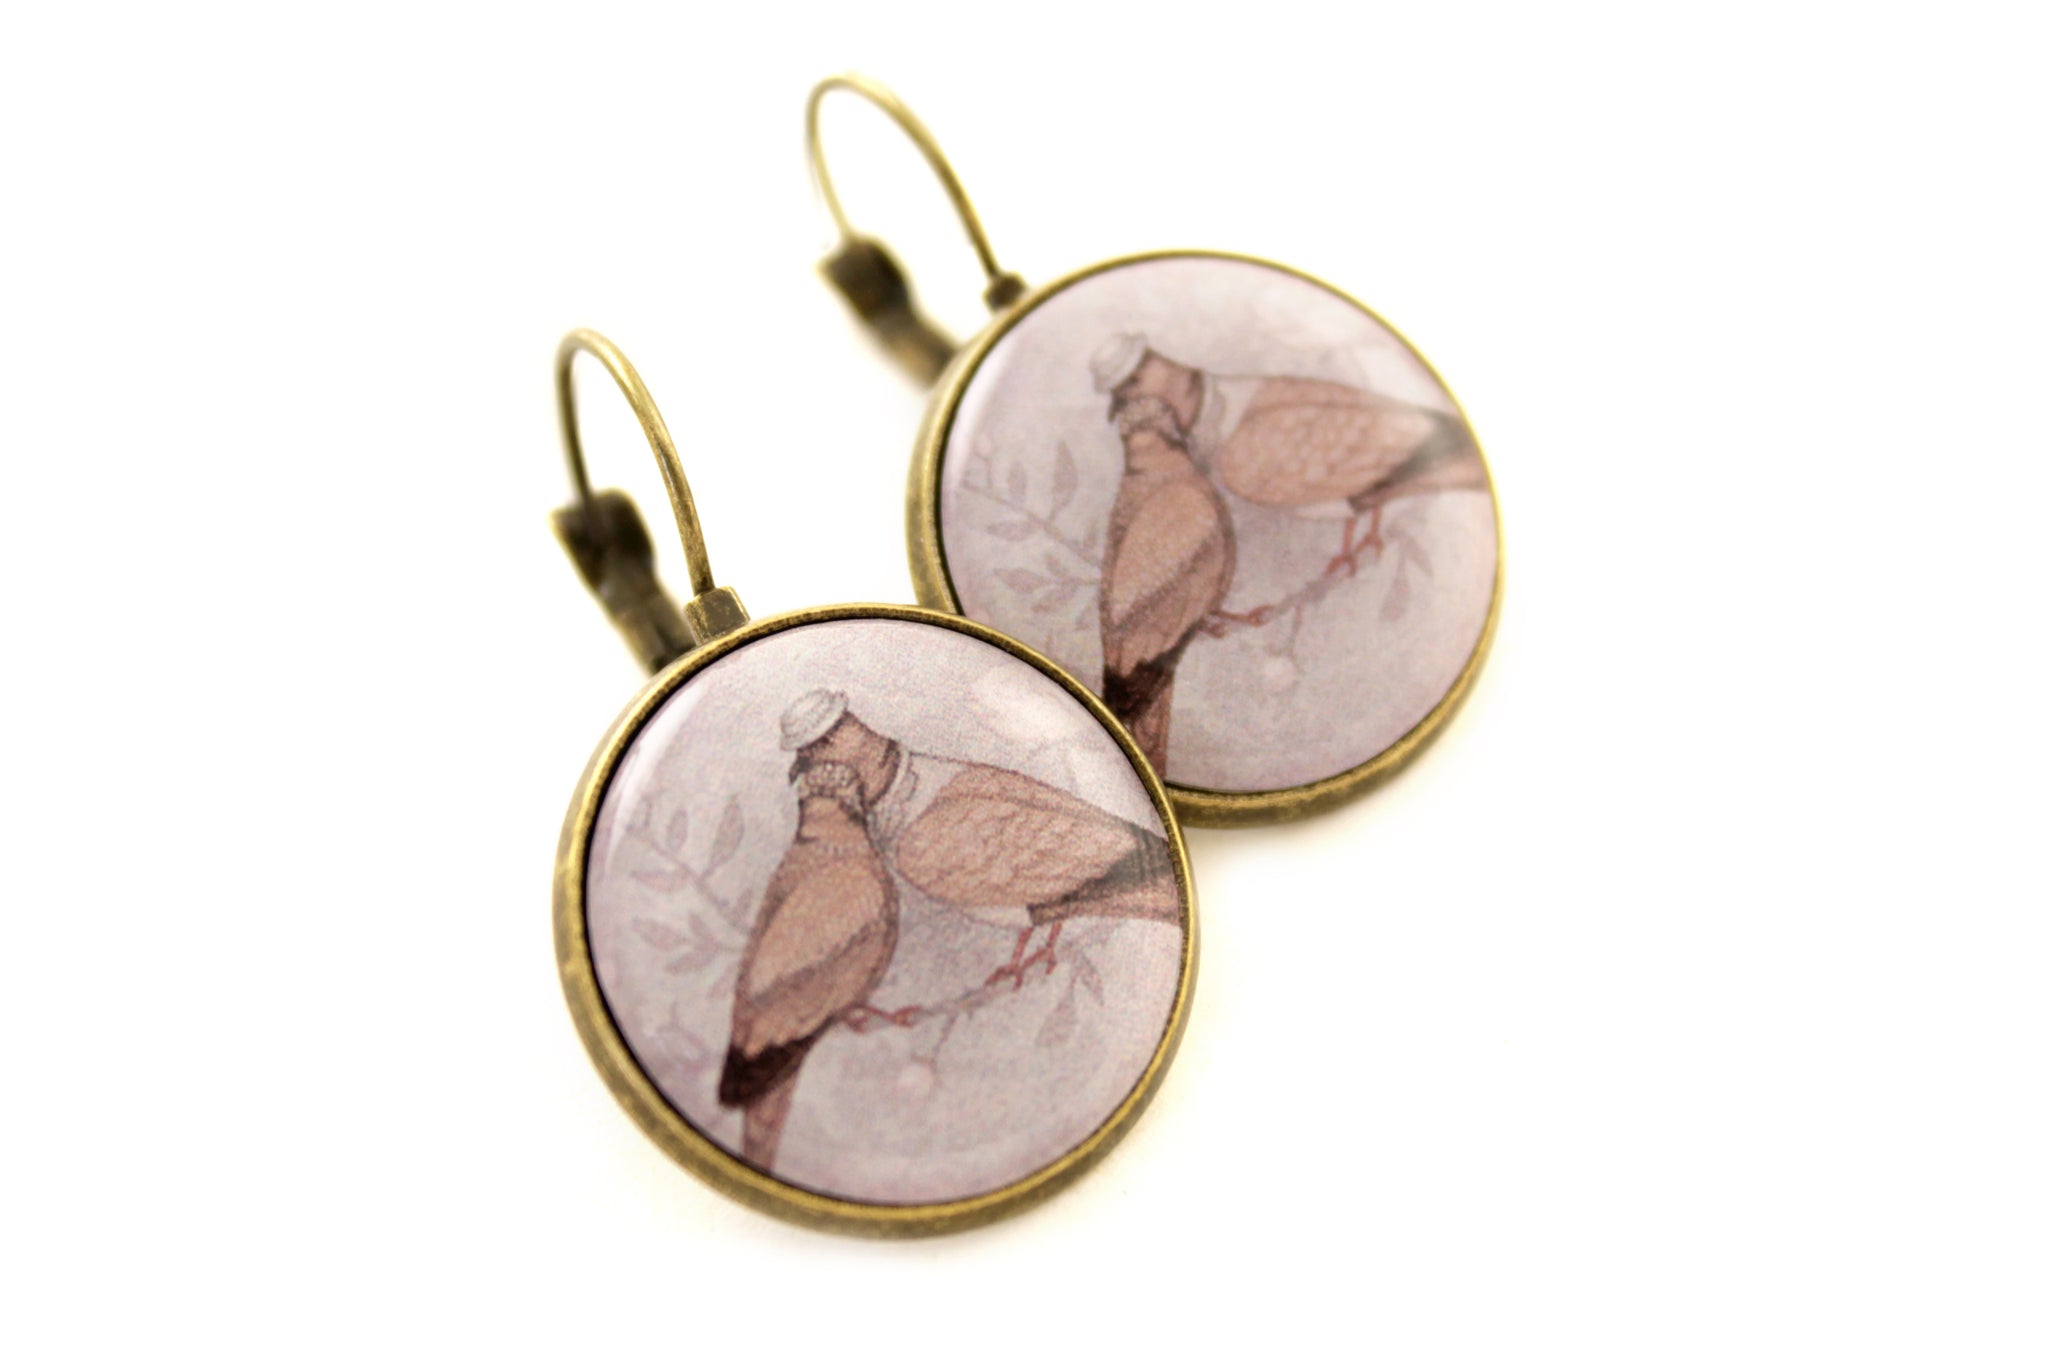 Earrings "Love sees roses without thorns"  (European turtle doves)